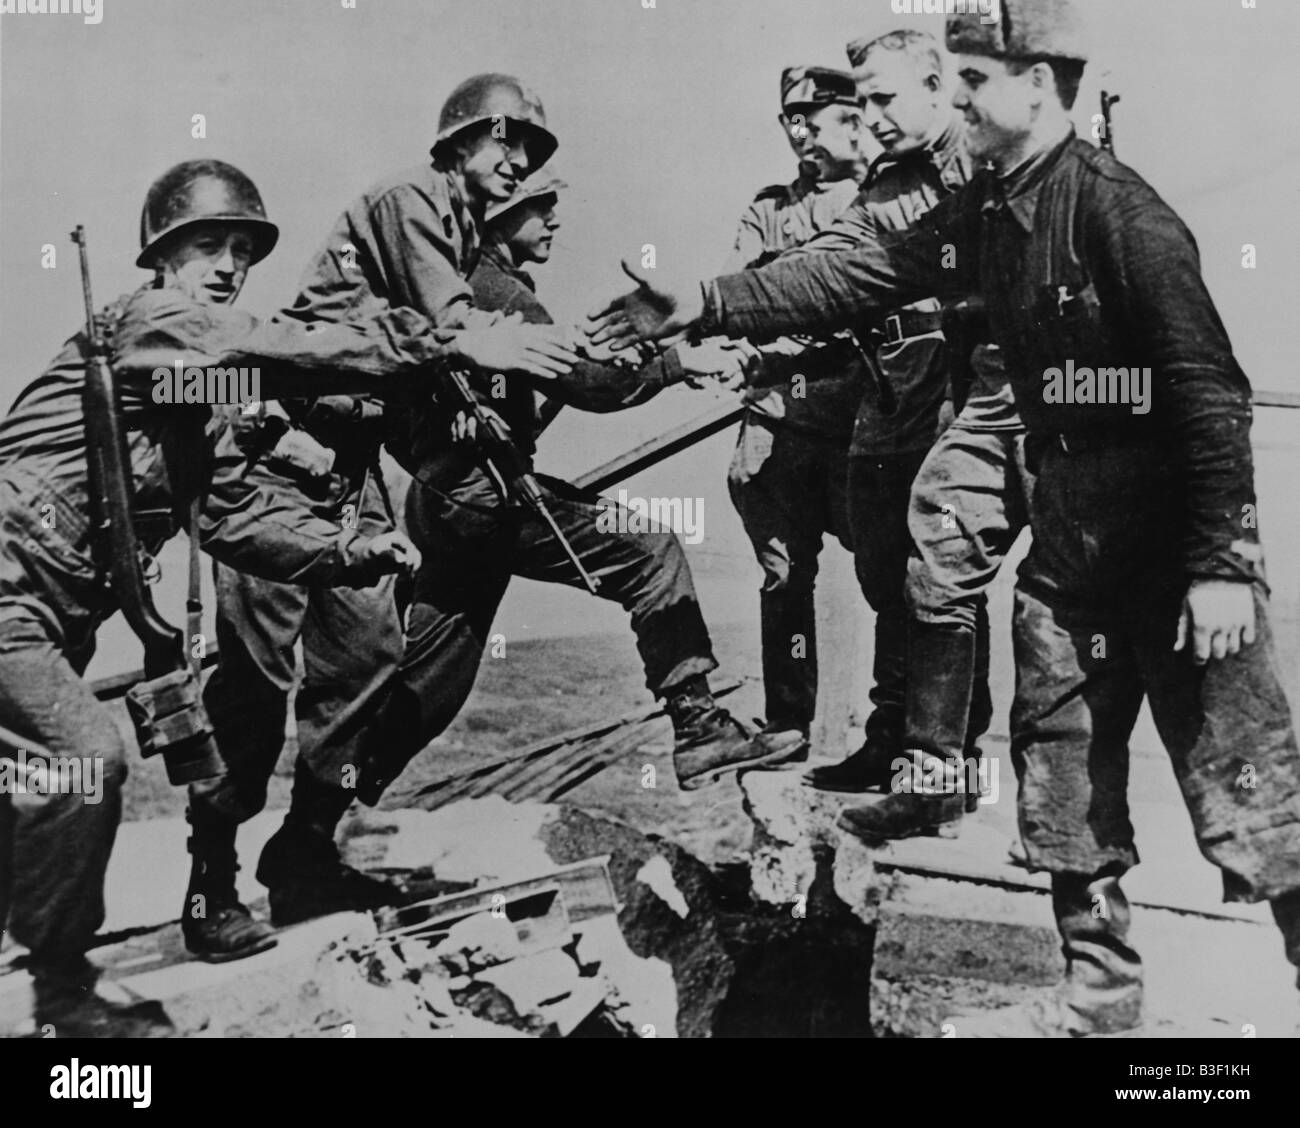 9 1945 4 25 A1 WW2 Red Army and US Soldiers Torgau 45 Second World War 1939 45 End of war Advanced units of the 1st US Army and Stock Photo